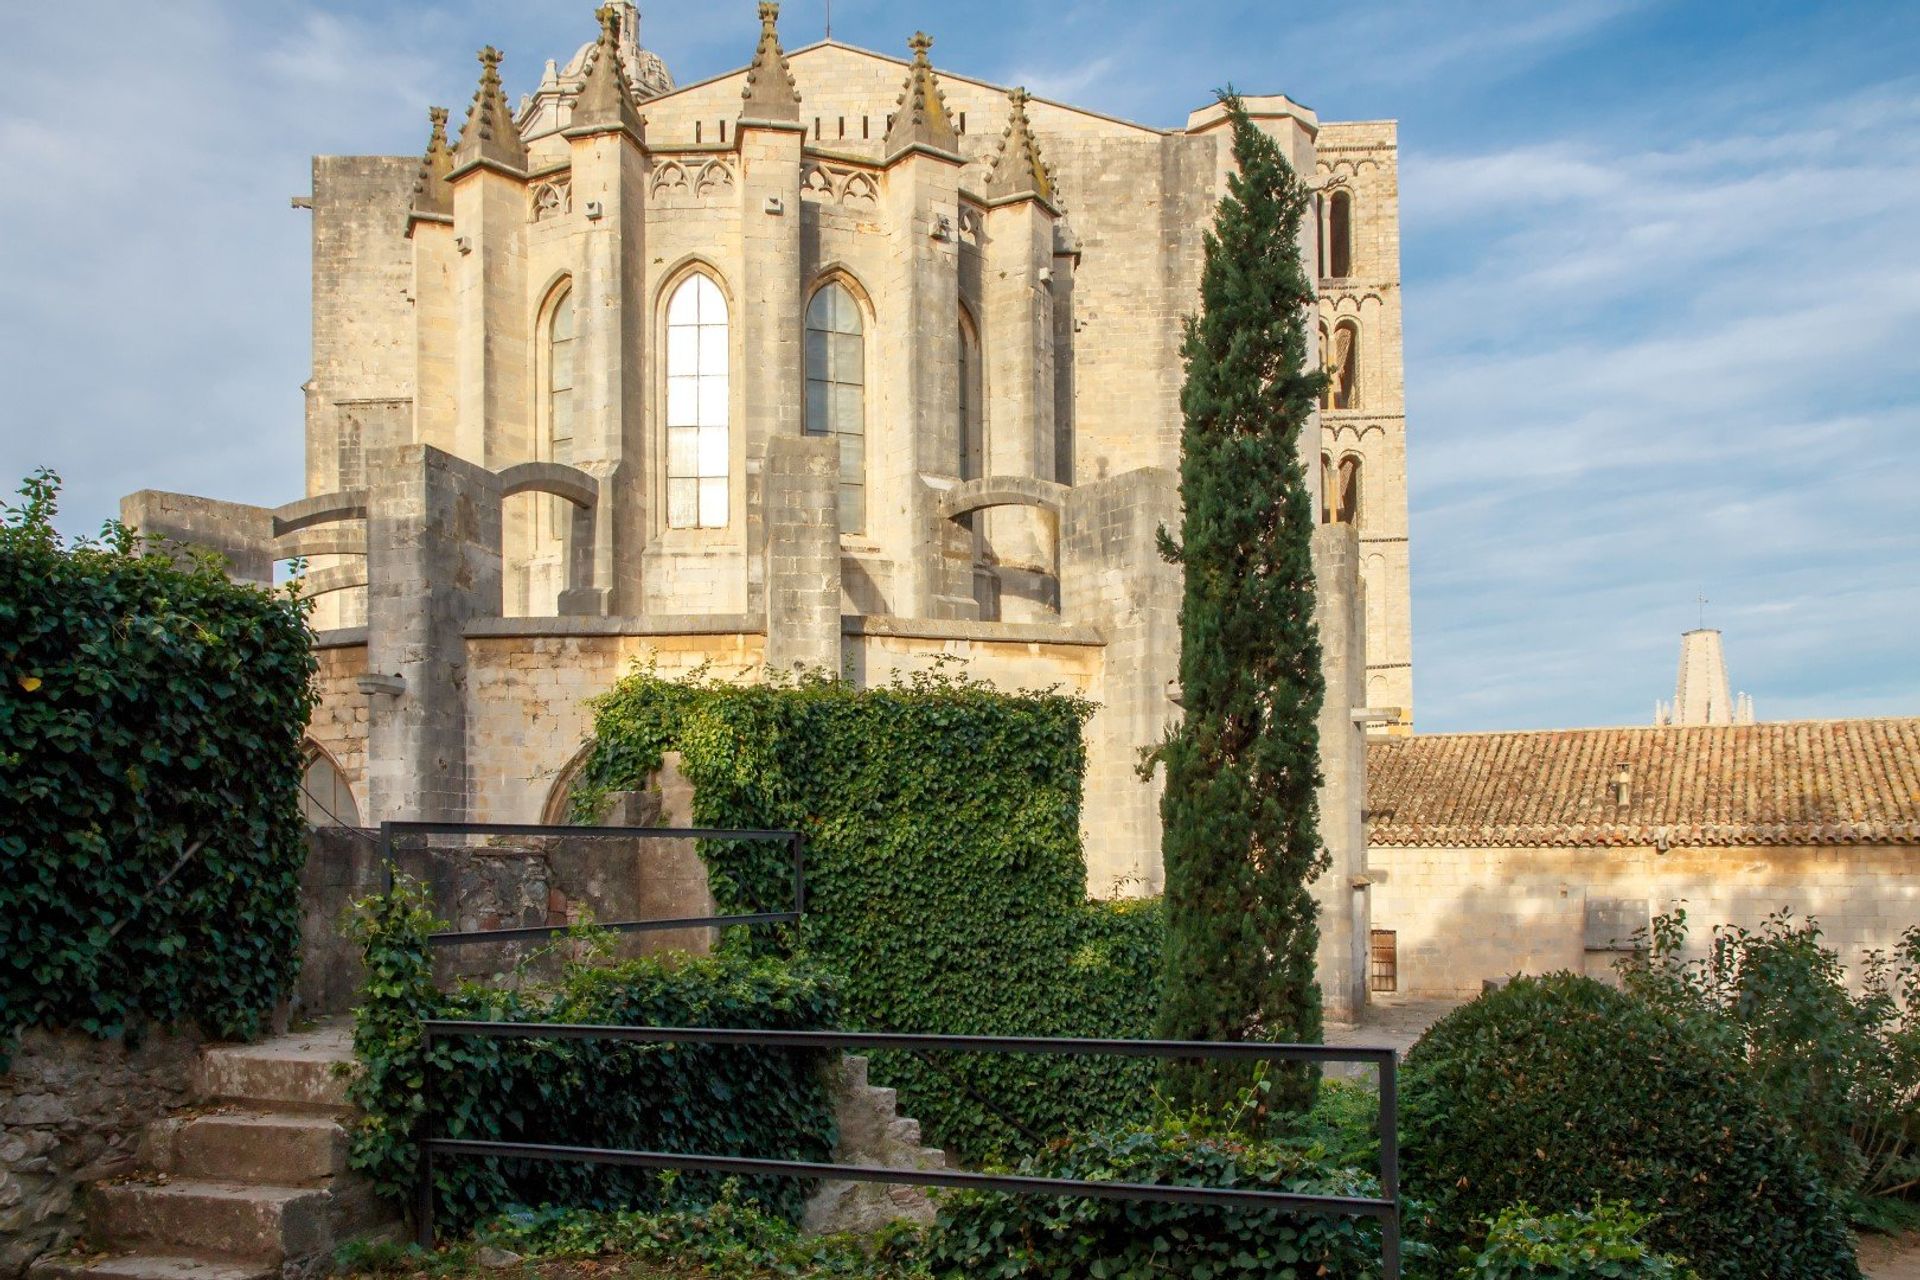 The magnificent fairytale-like cathedral of St Mary, located at the heart of the Força Vella.